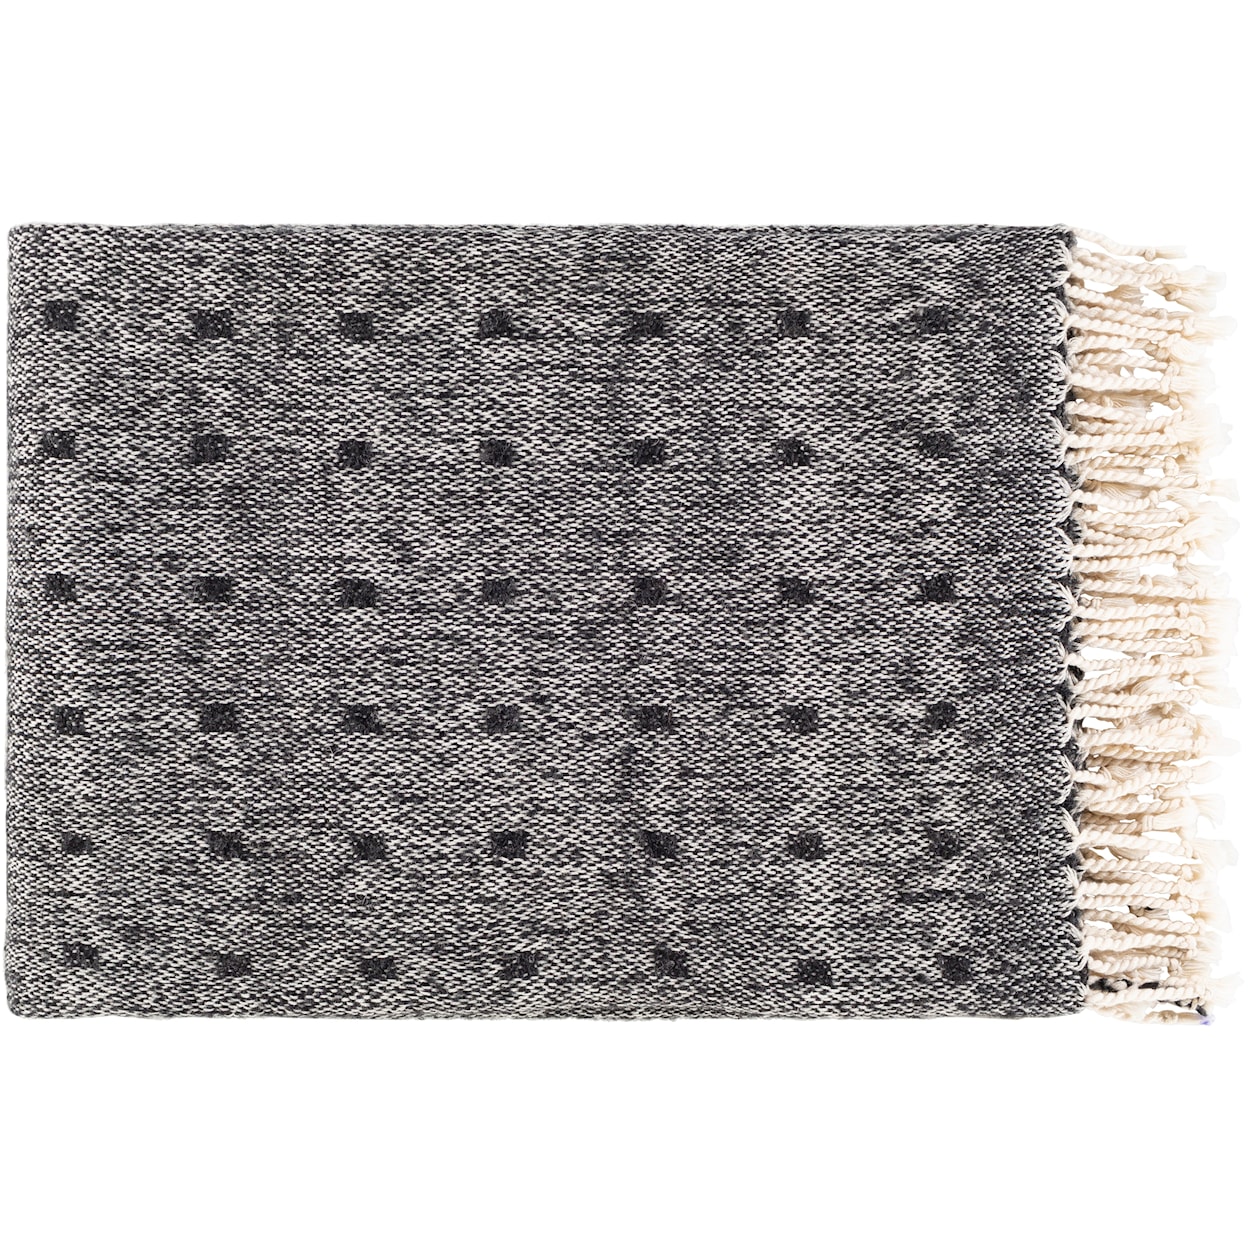 Surya Rugs Hamlet Miscellaneous Accessories